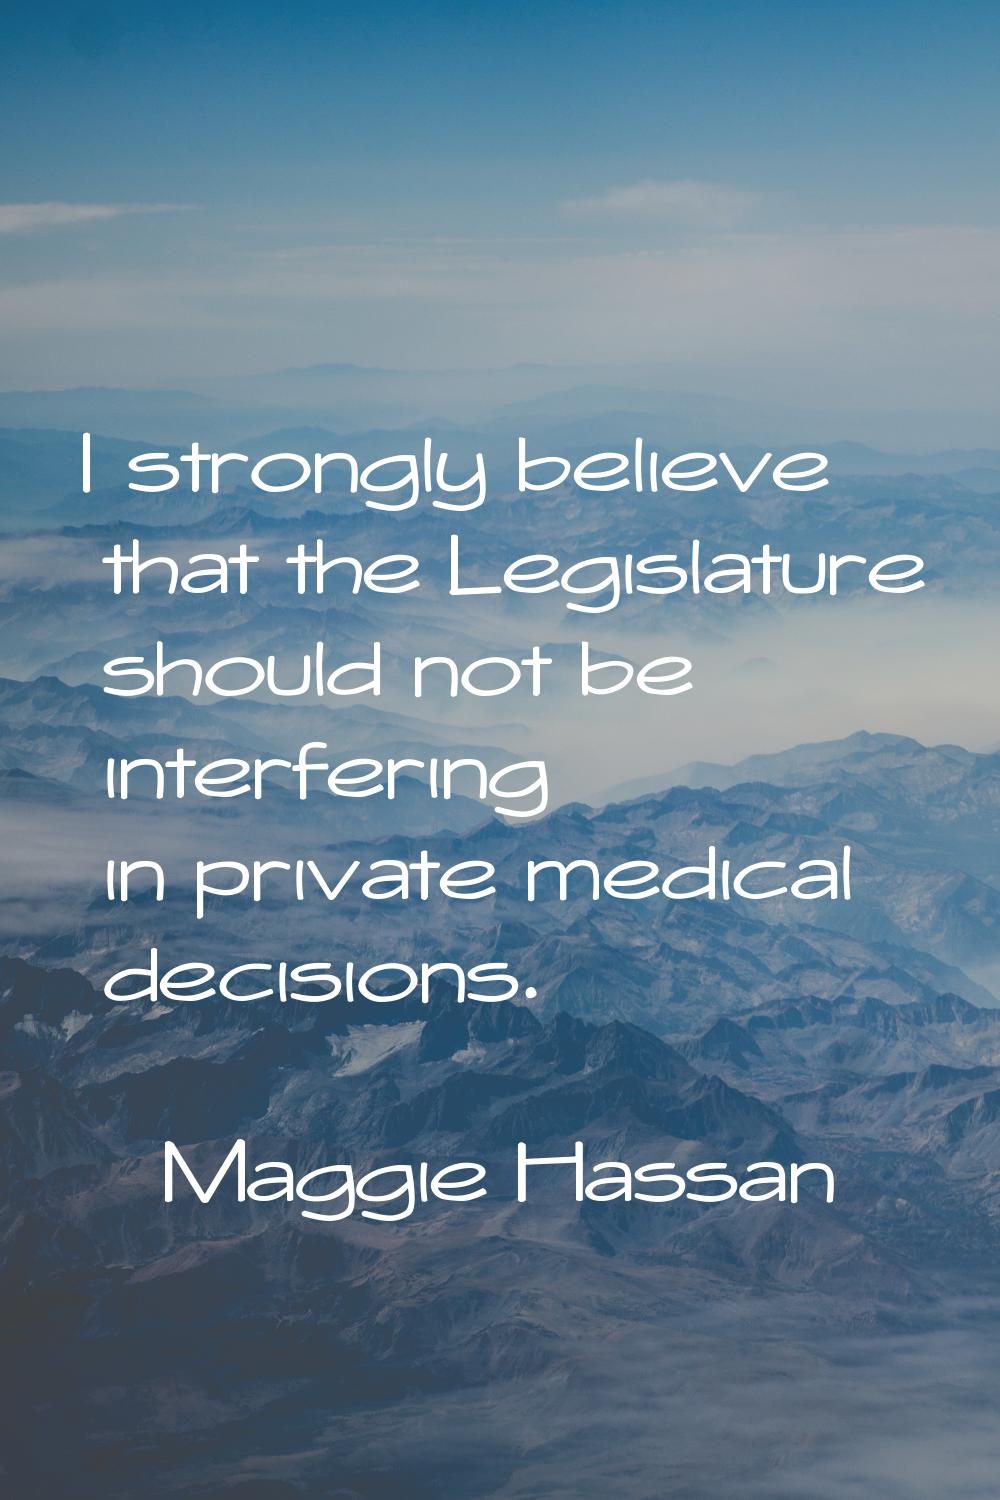 I strongly believe that the Legislature should not be interfering in private medical decisions.